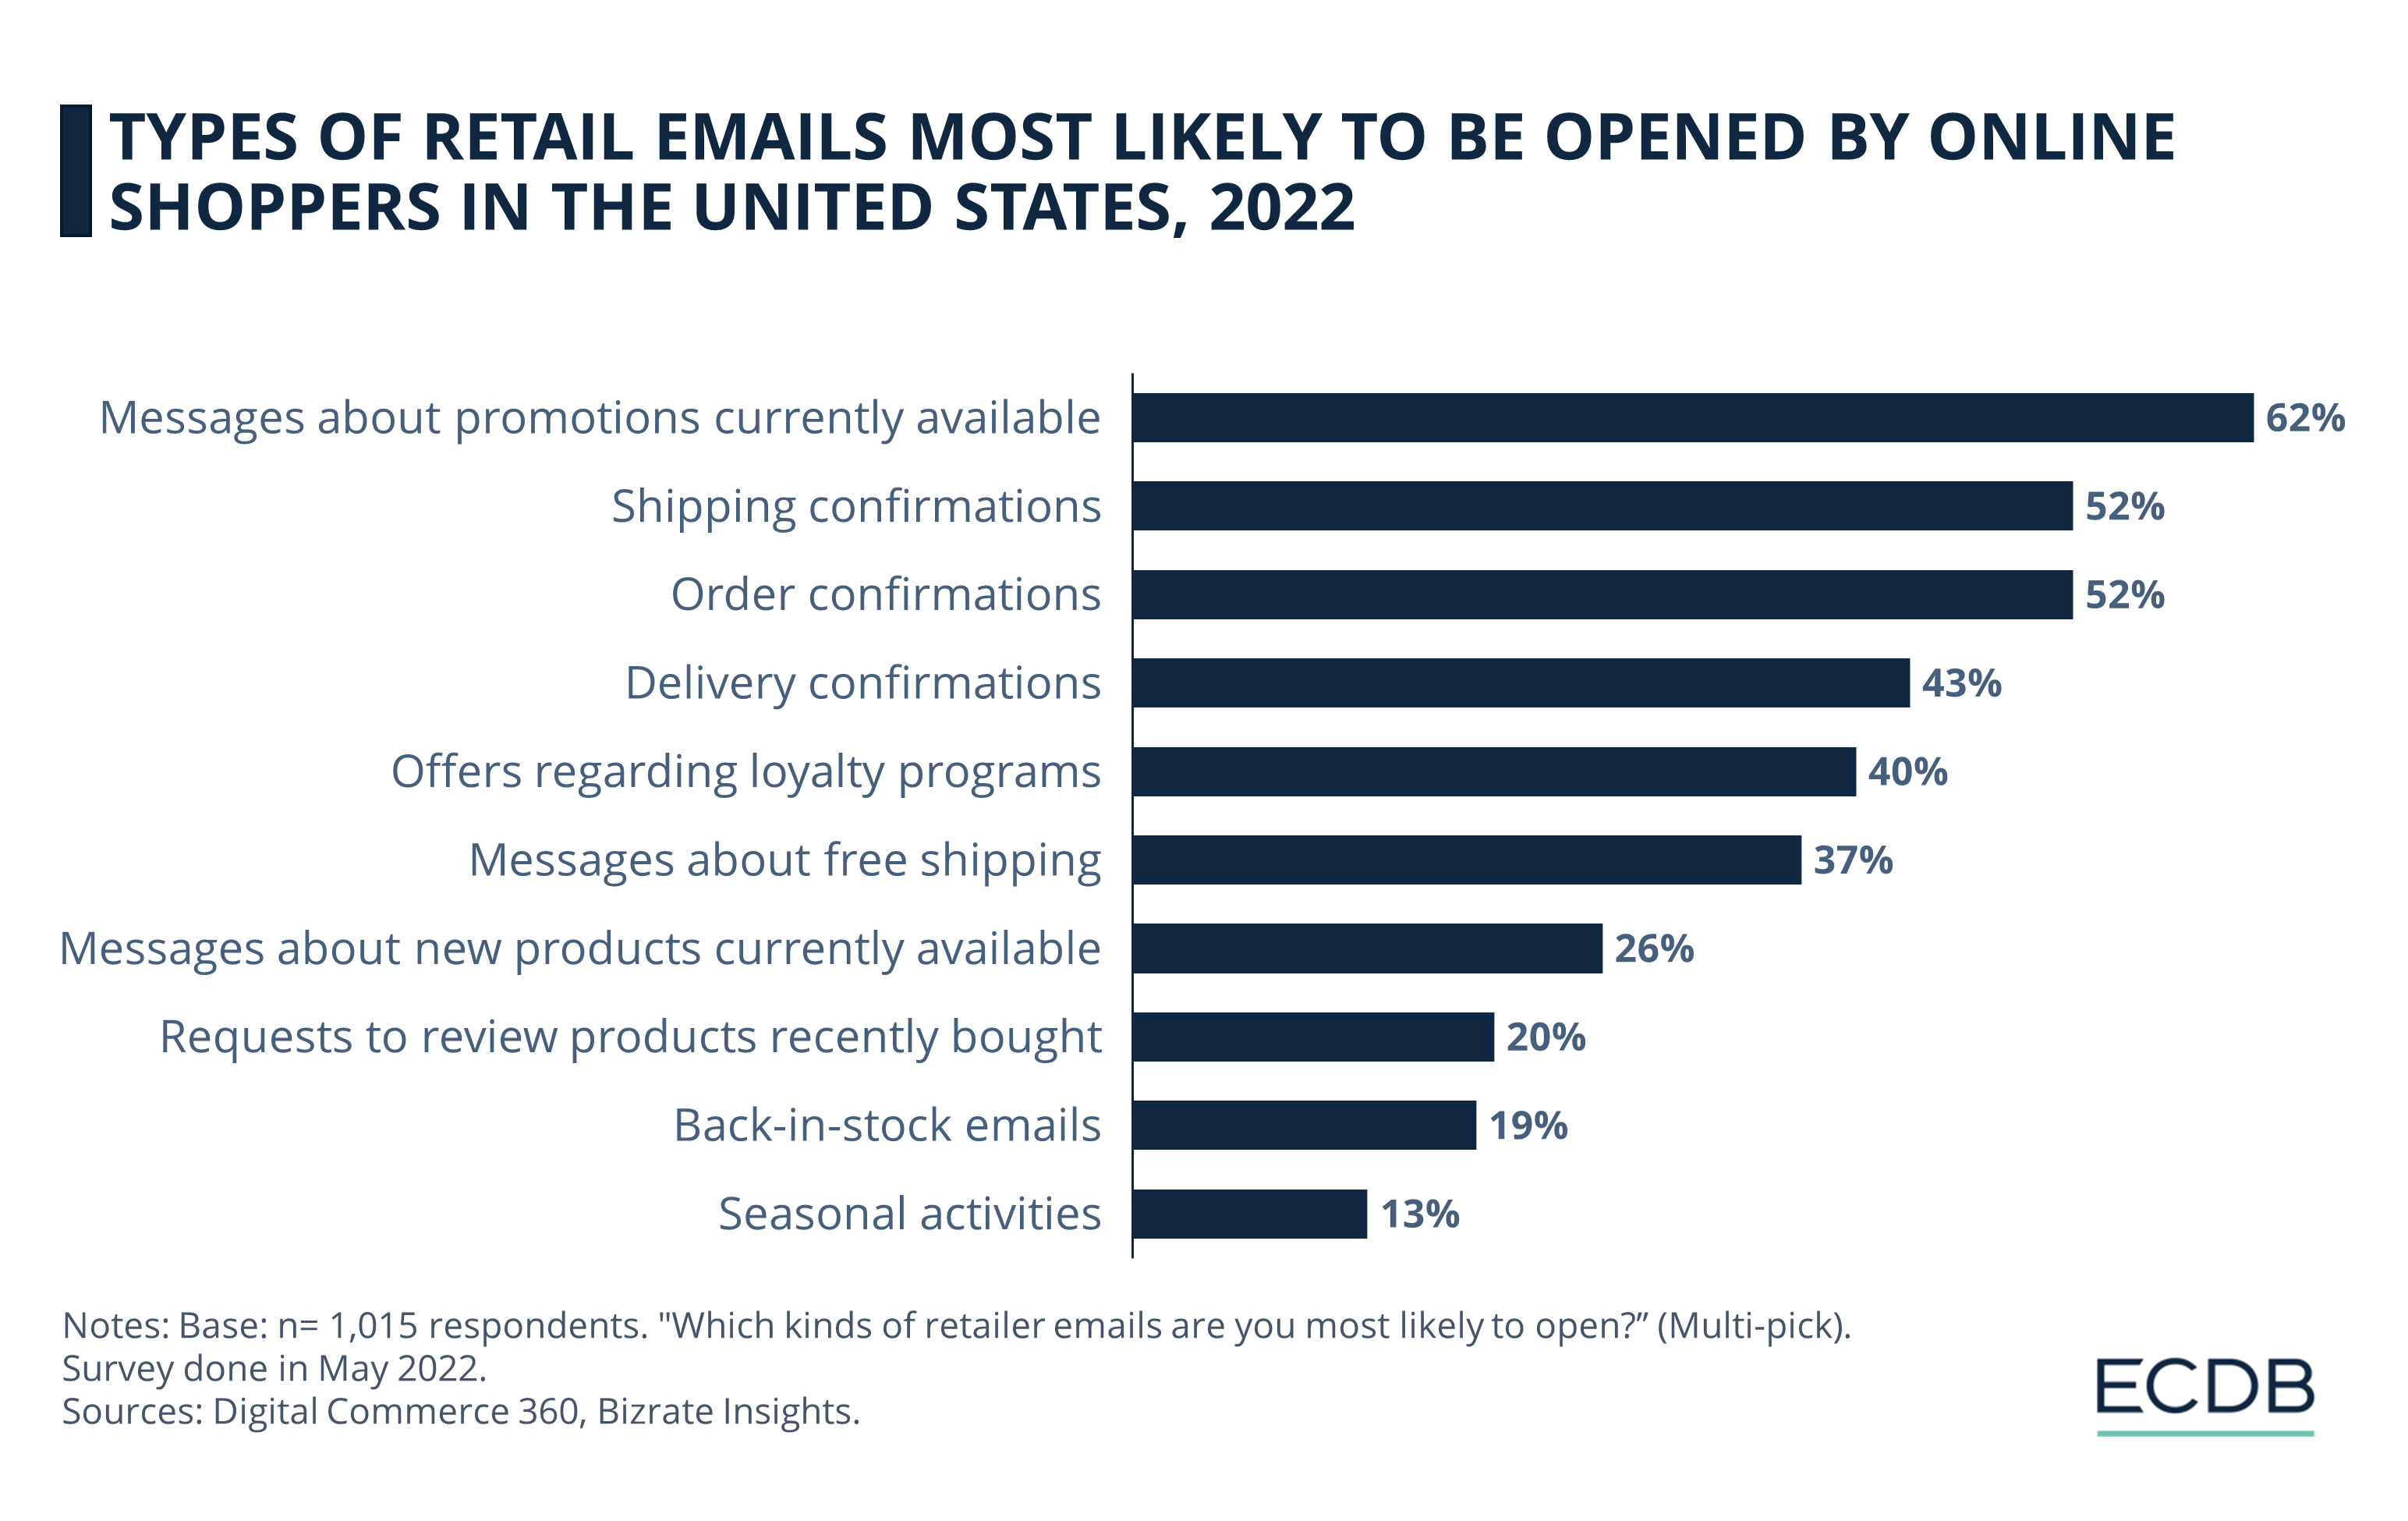 Types of Retail Emails Most Likely to Be Opened by Online Shoppers in the United States, 2022